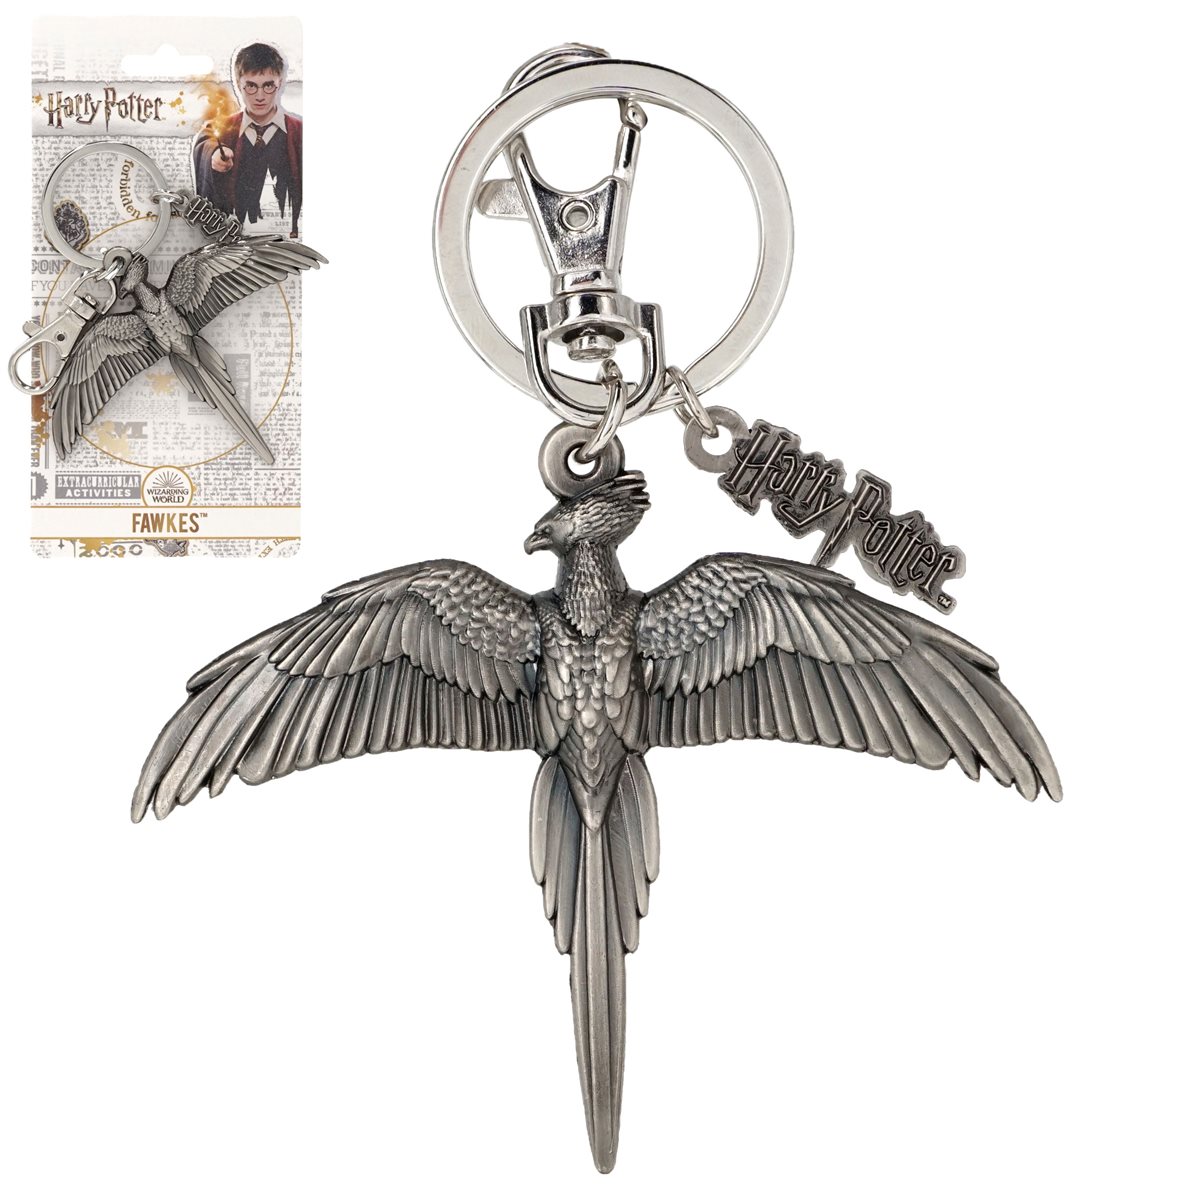 Harry Potter Deathly Hallows Pewter Key Ring keychain 